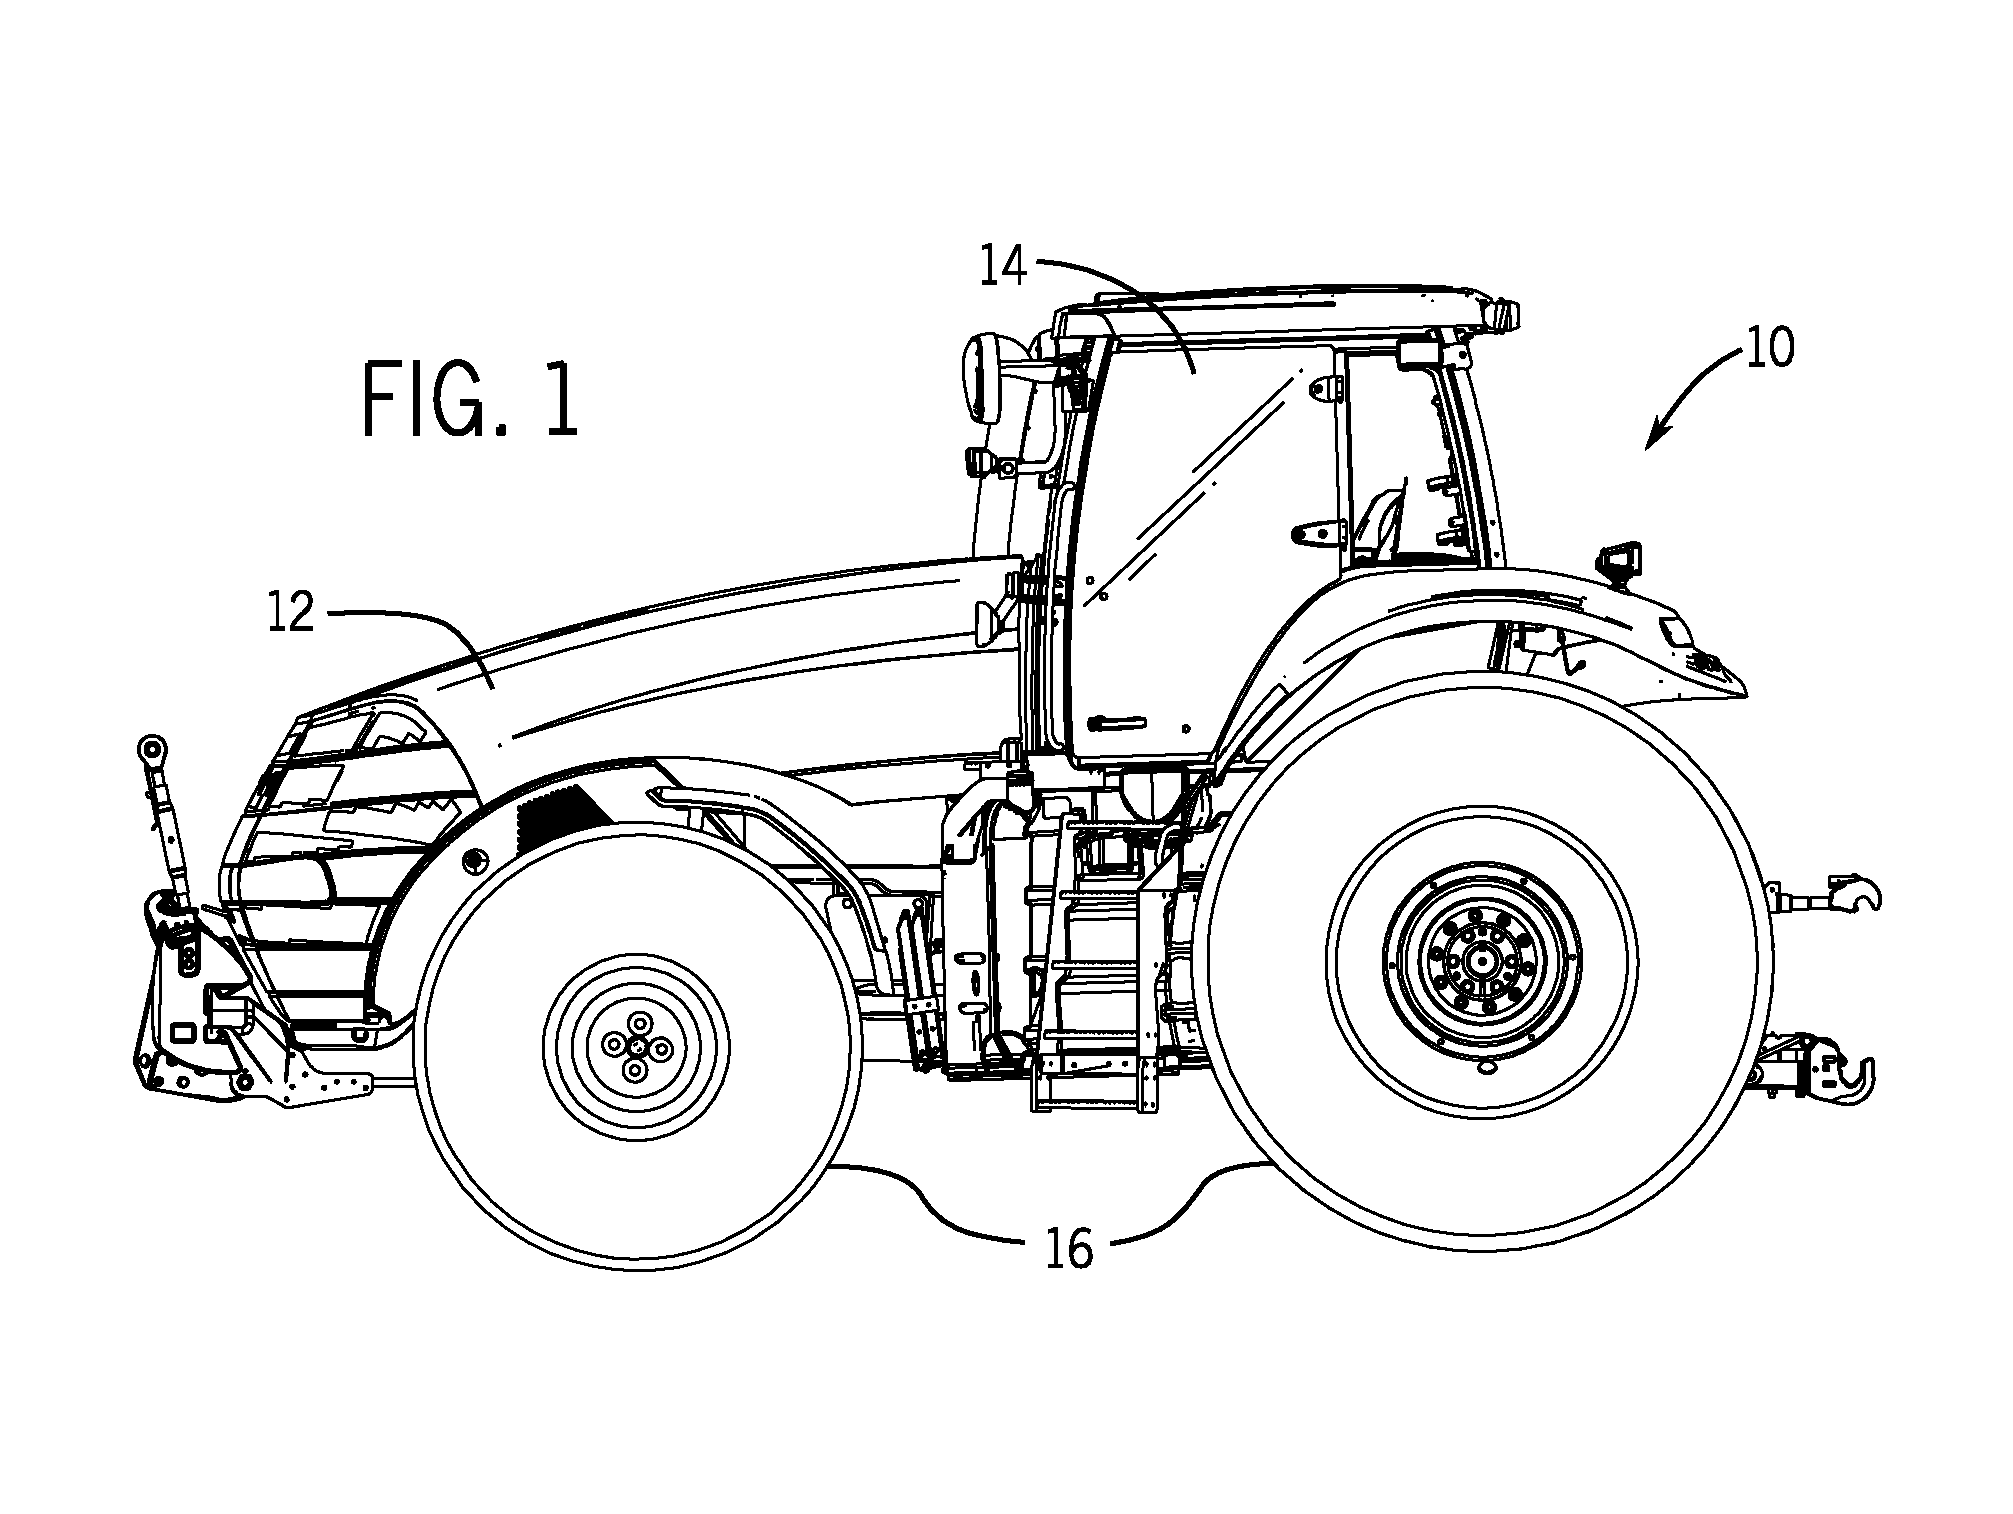 Air intake system for an off-road vehicle